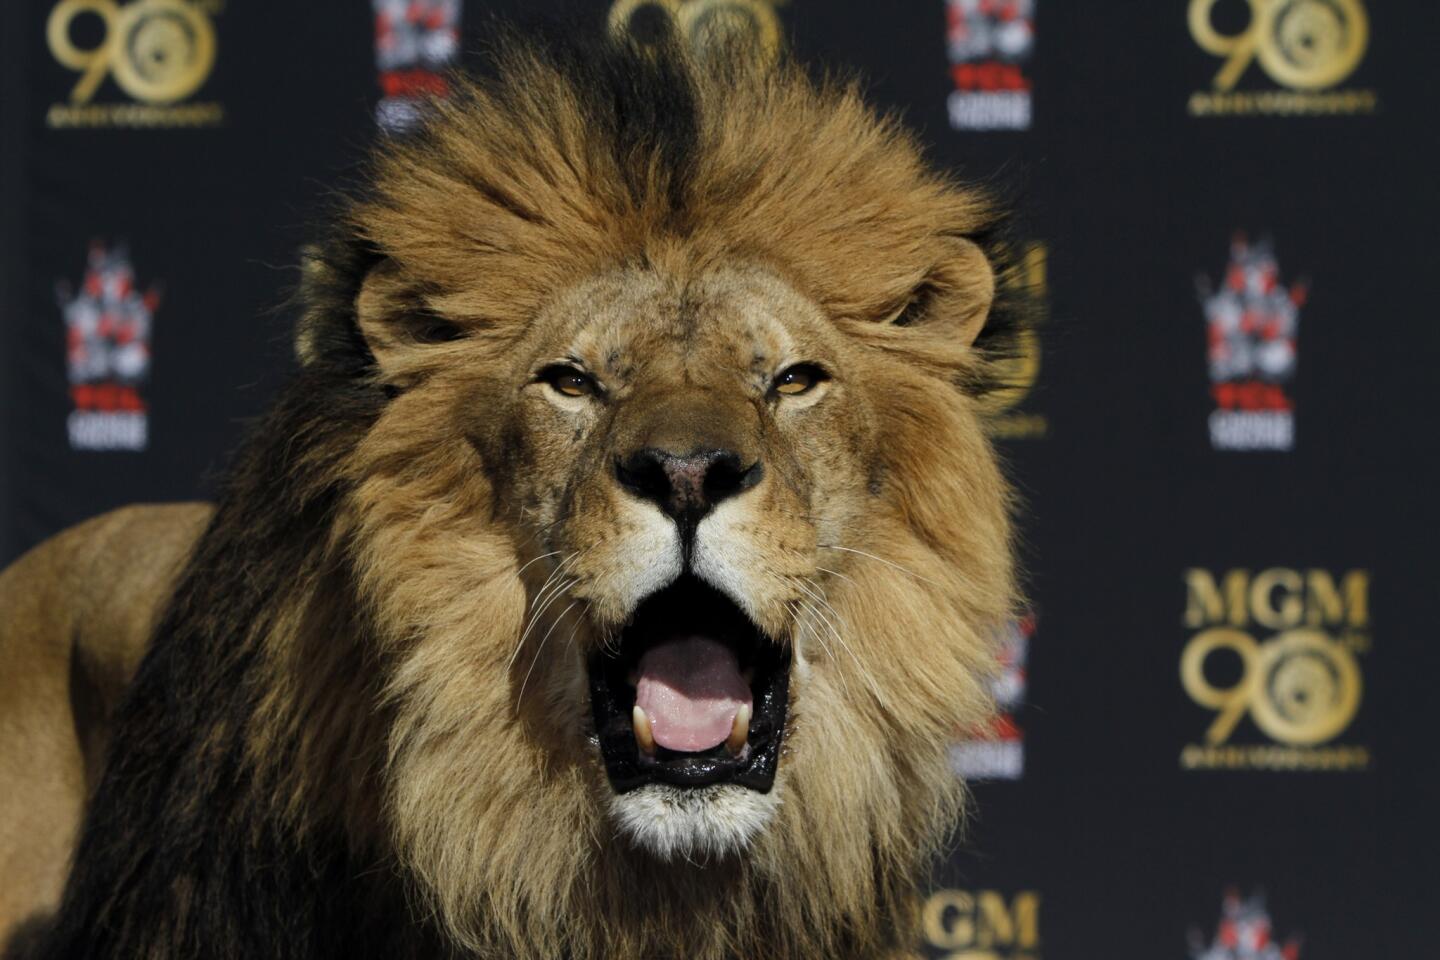 For nearly 90 years, Leo the roaring lion has roared at the start of all MGM films. On Wednesday, he visited the TCL Chinese Theatre in Hollywood to celebrate MGM's 90th anniversary.